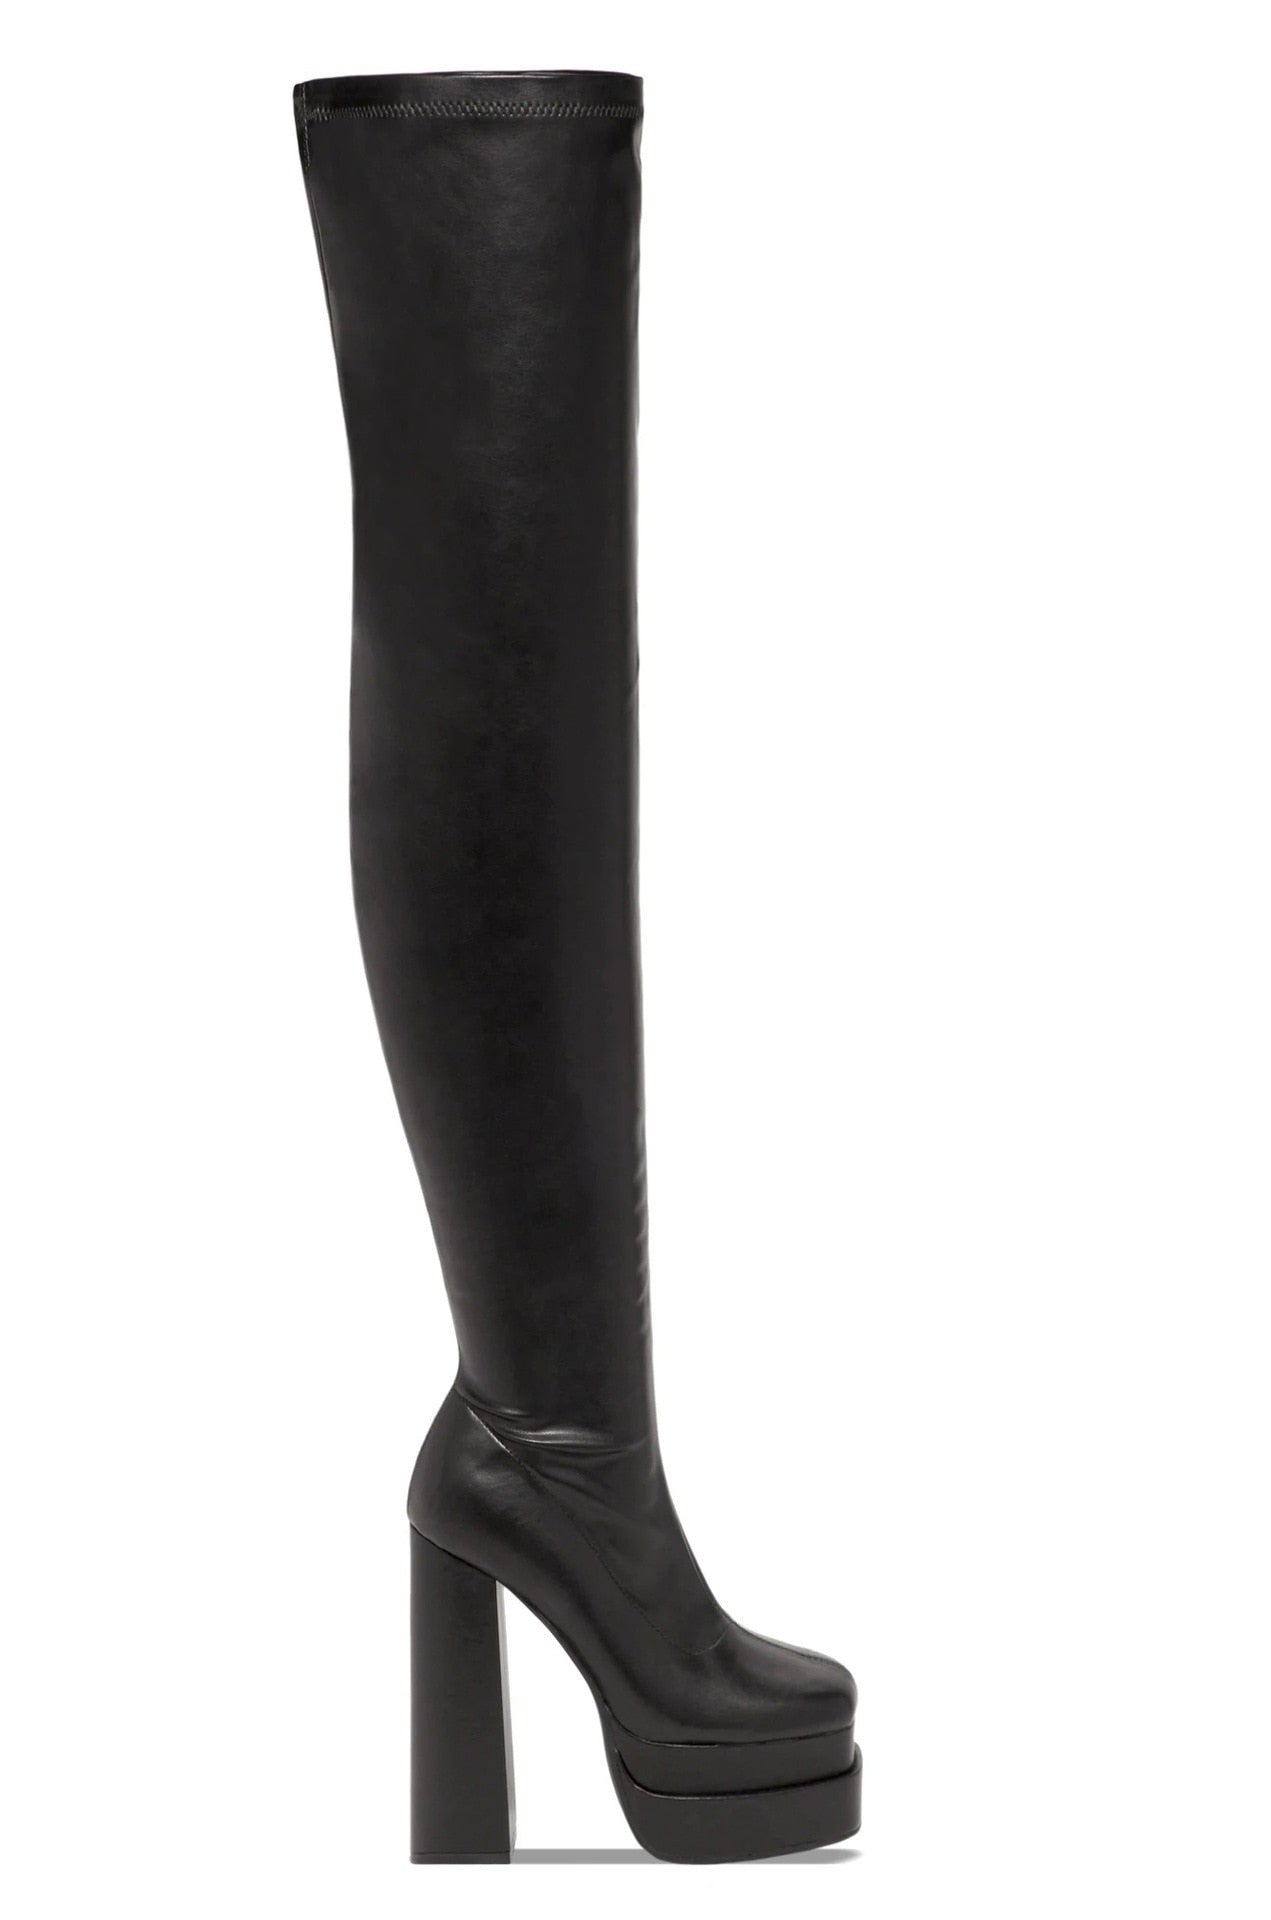 Villa Blvd Thigh High Vexed Boots ☛ Multiple Colors Available ☚